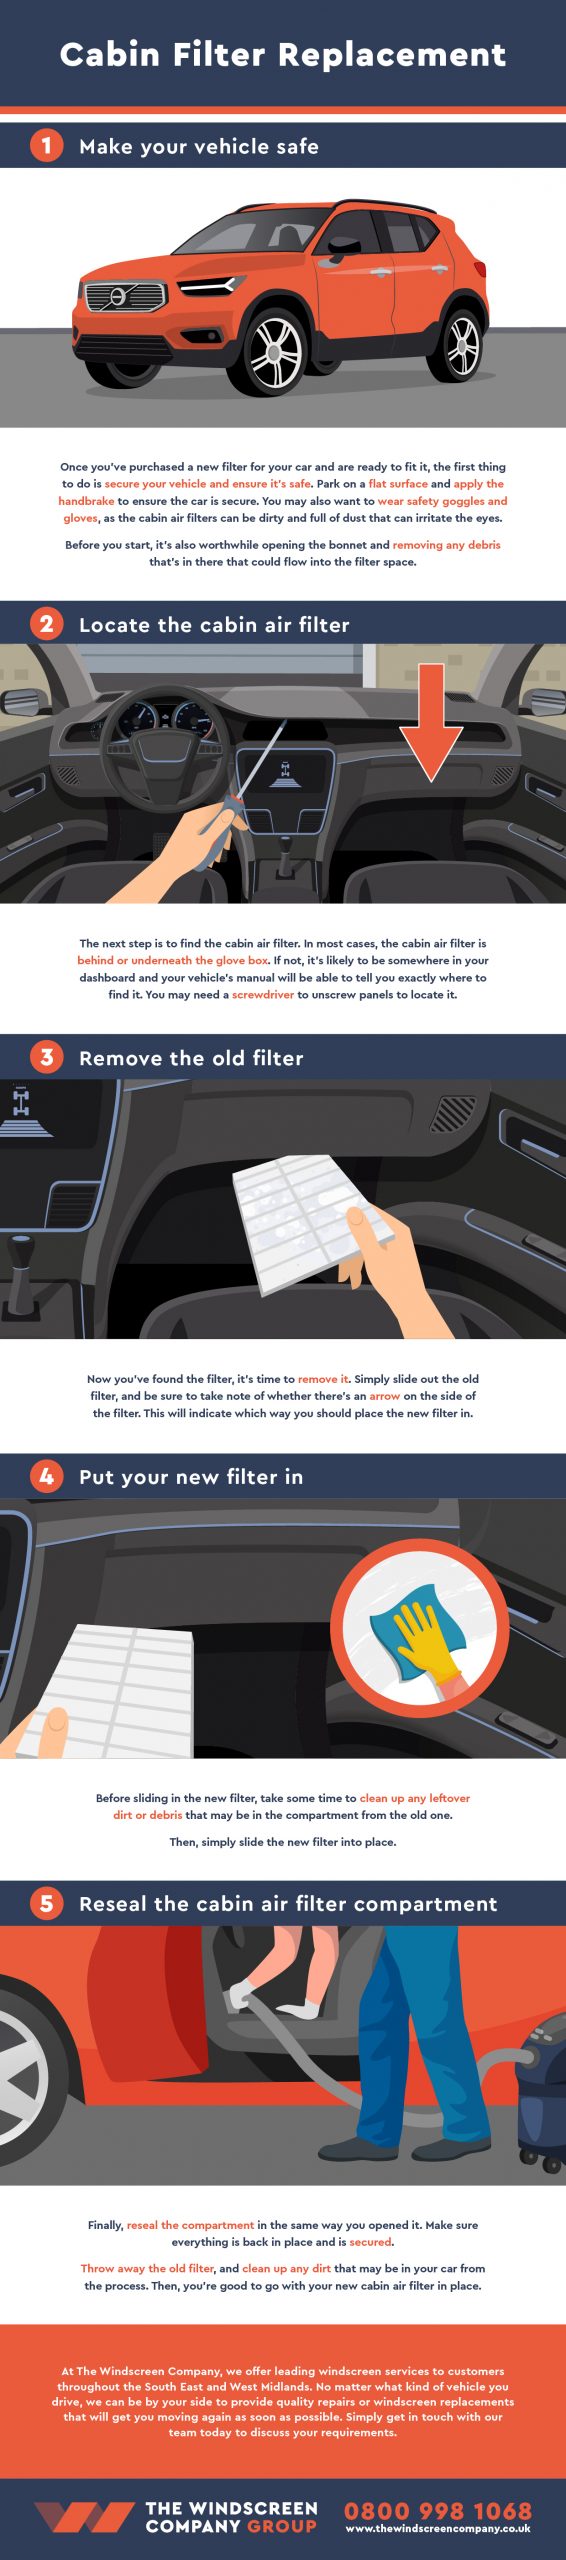 Why You Should Regularly Change Your Cabin Air Filter - The